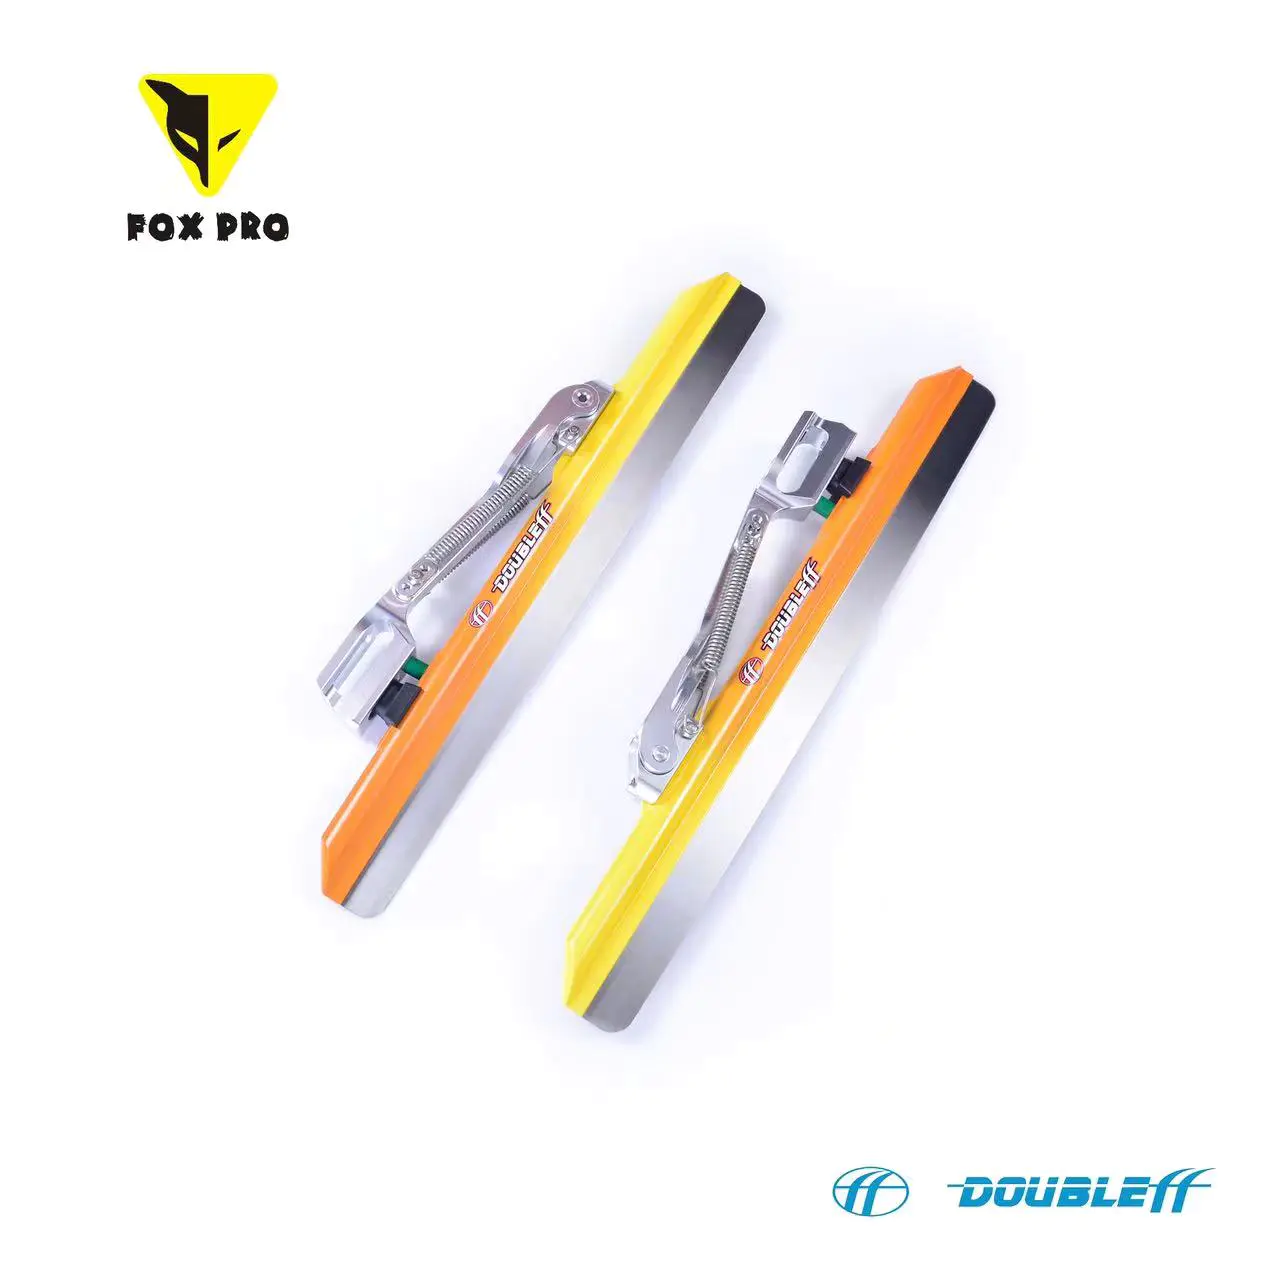 FOX PRO x Double FF 64 HRC Long Track Ice Skate Blades CNC Aluminum 7005 Ice Skate Blades For MEN&Women Indoor/Outdoor Sports